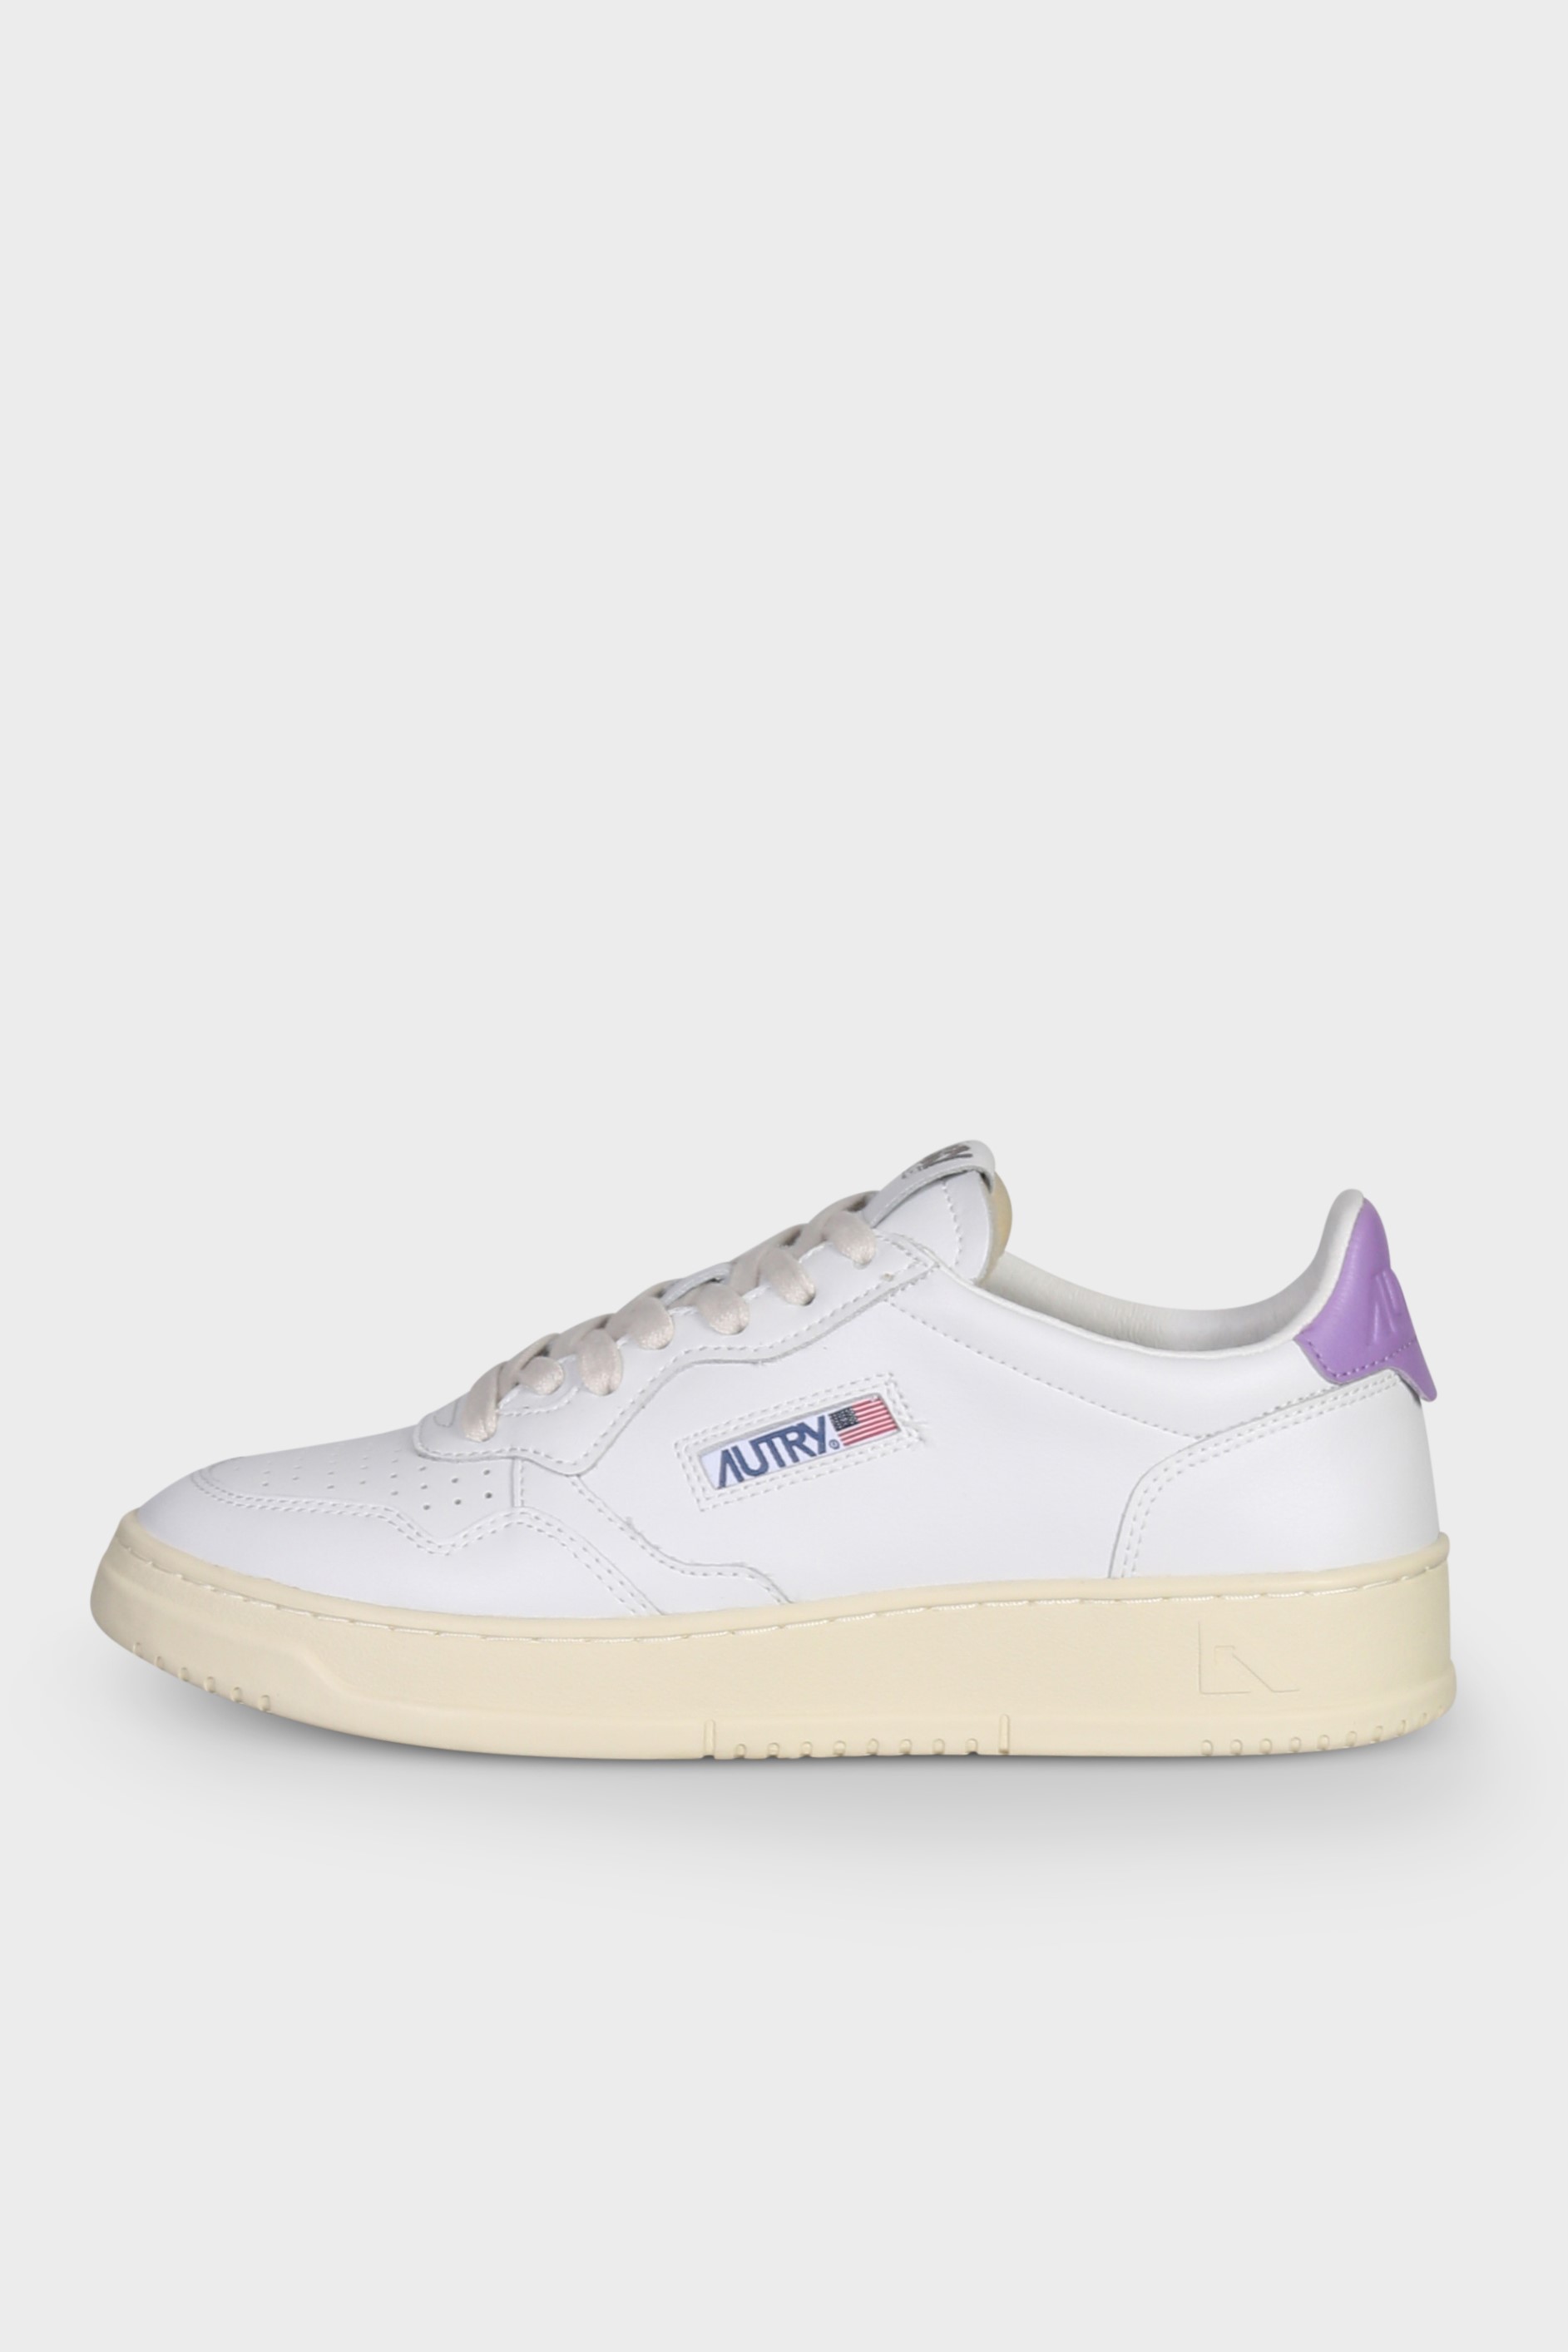 AUTRY ACTION SHOES Medalist Low Sneaker in White/Lavender